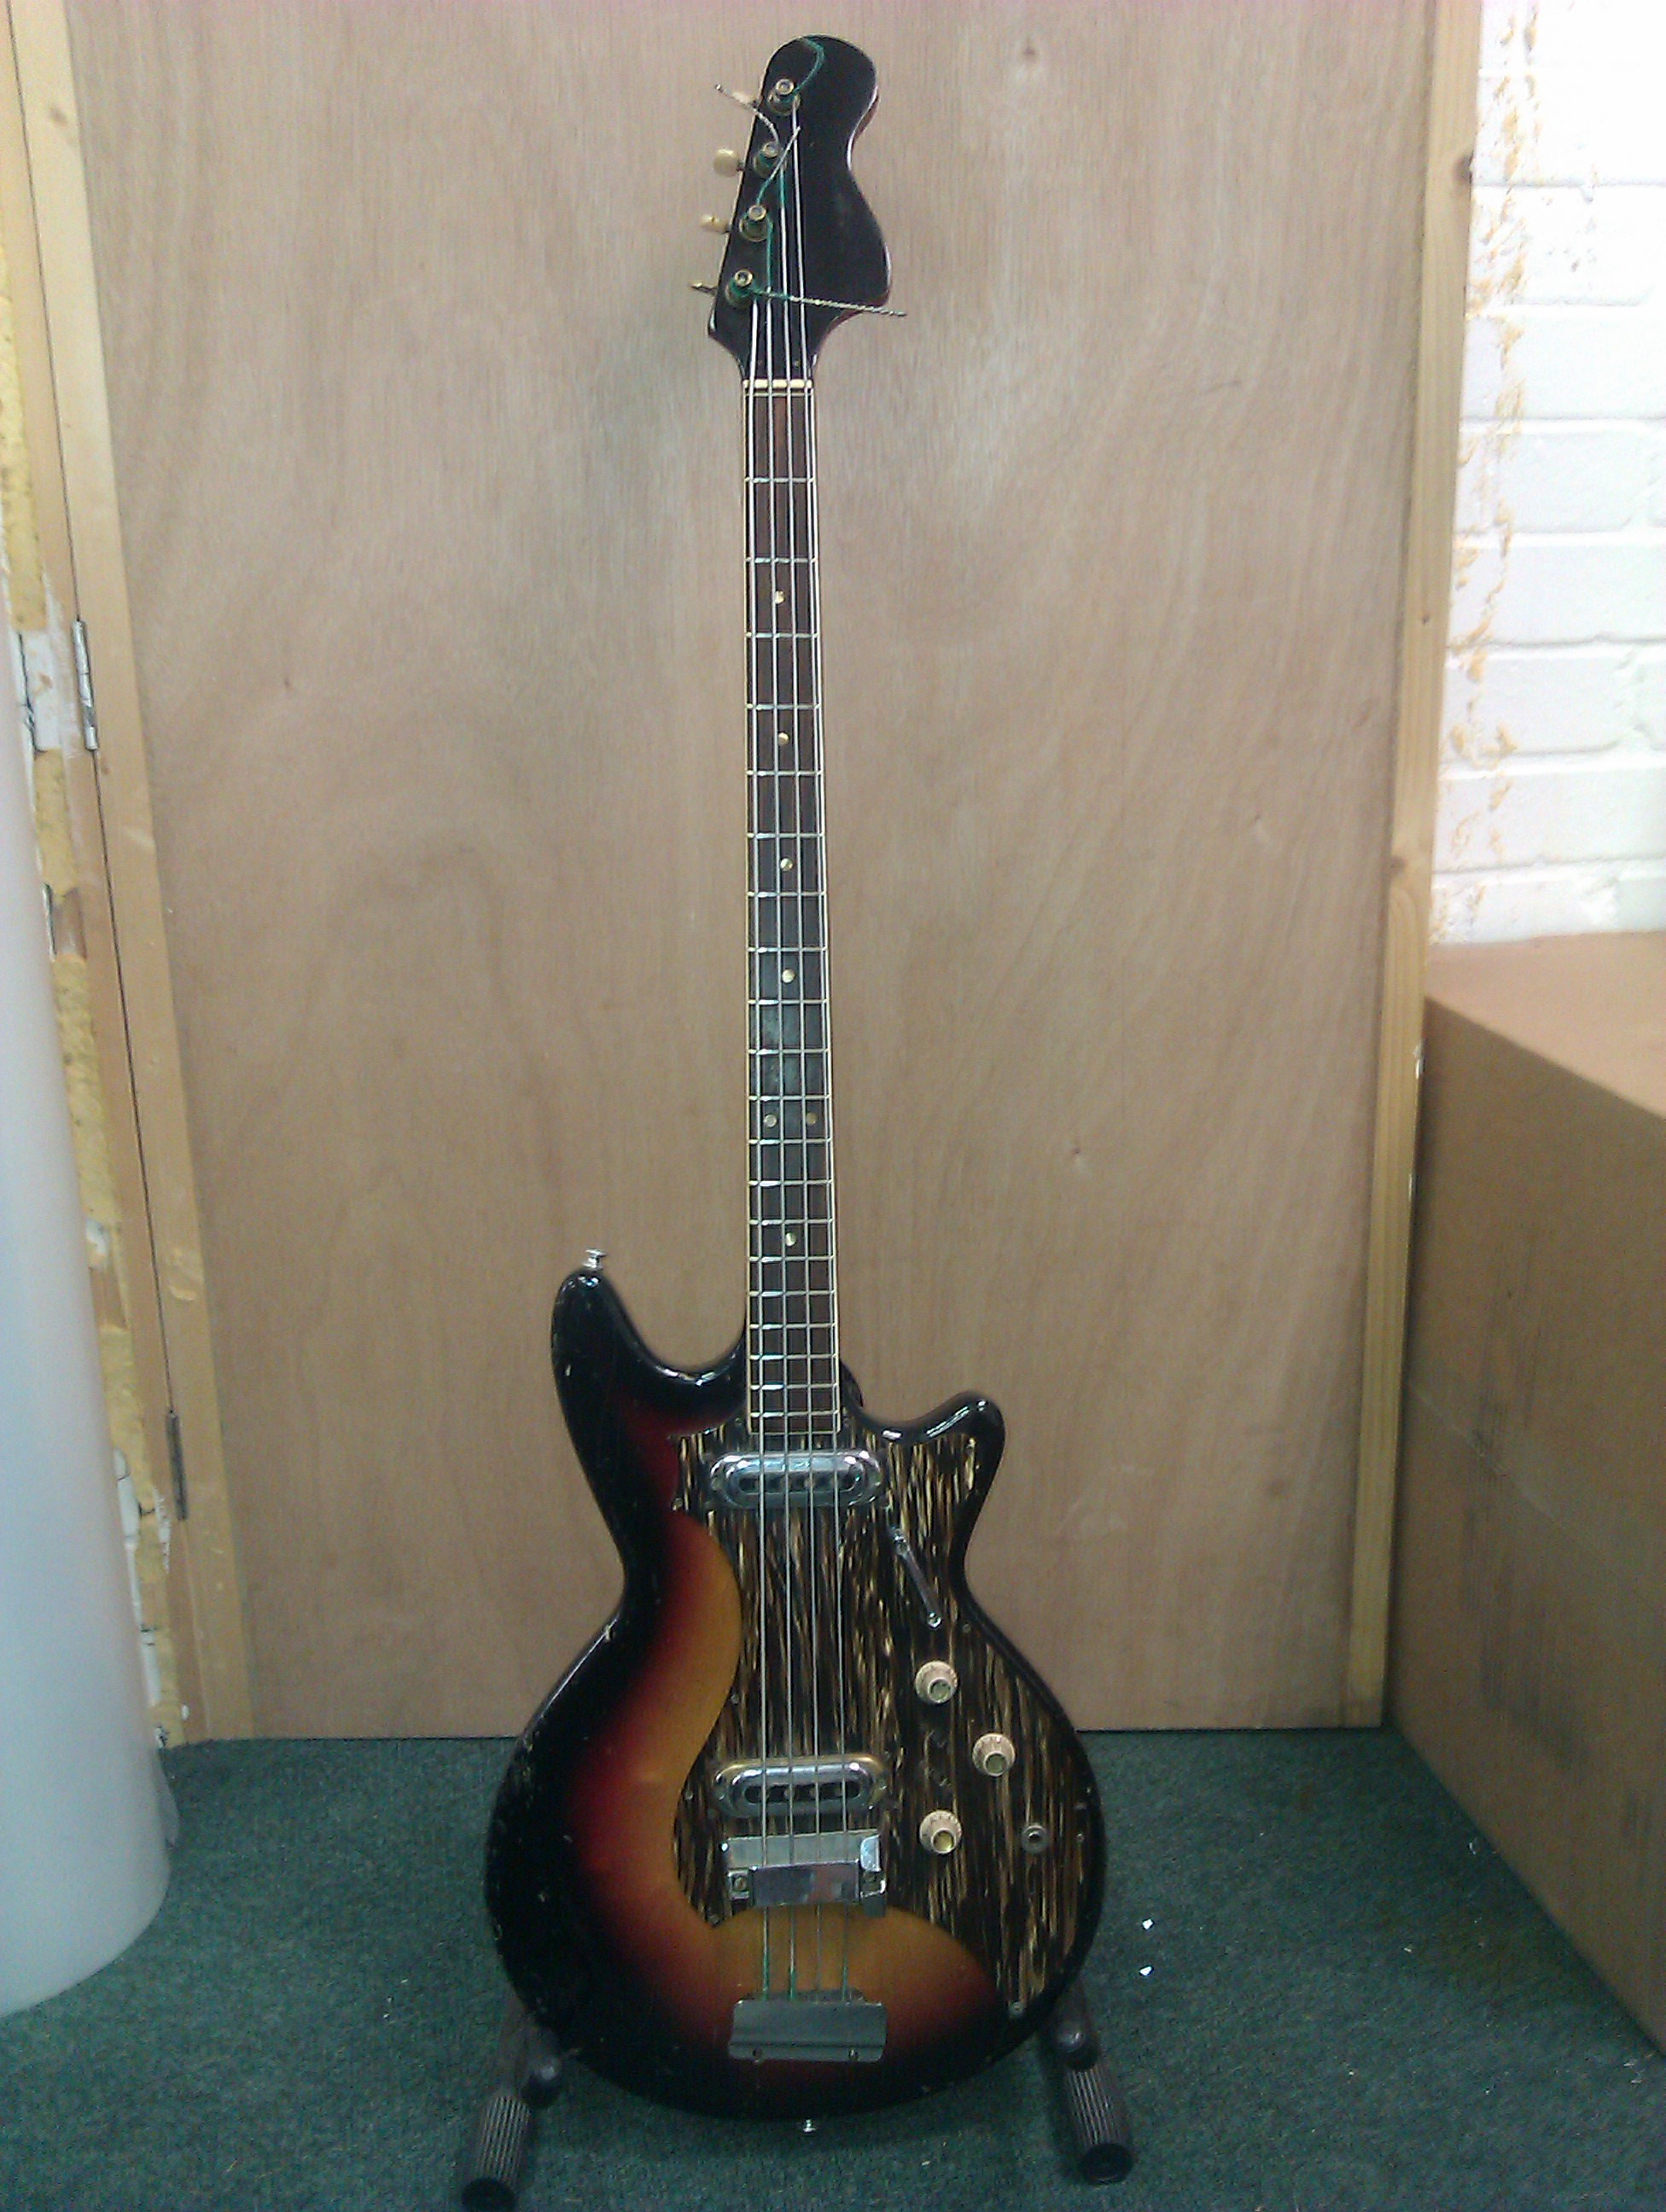 Early 60's short scale bass from Framus